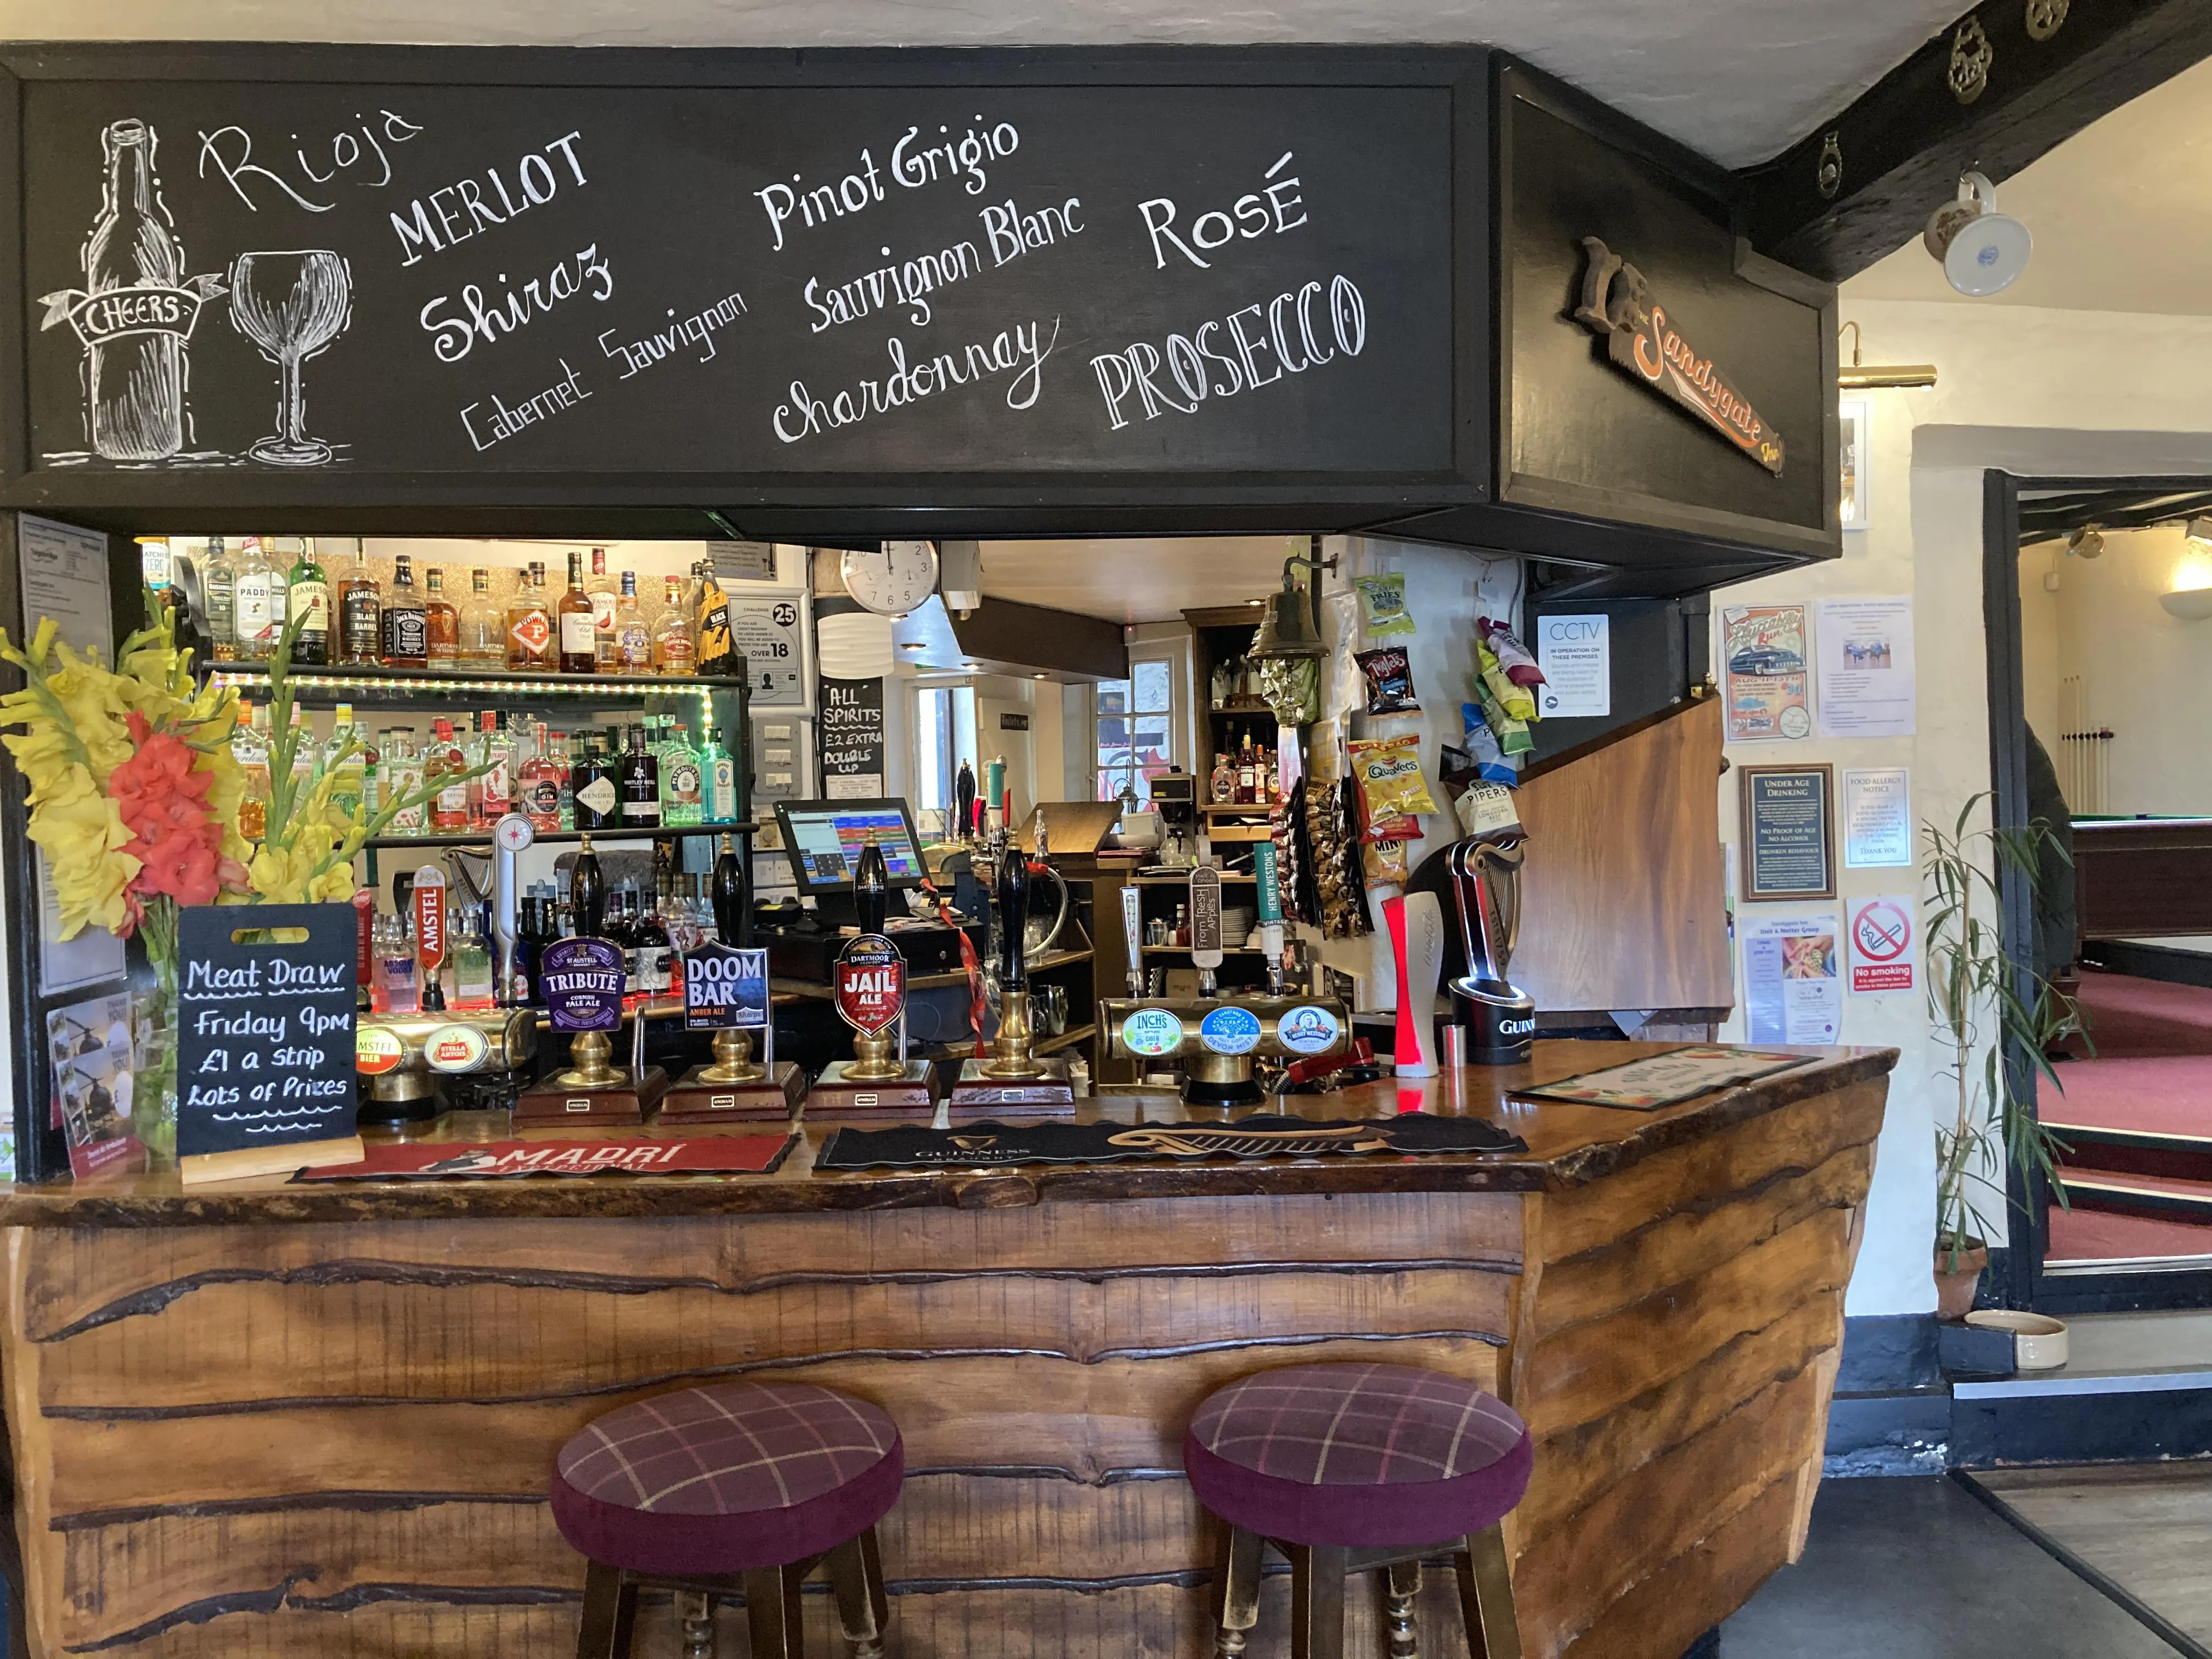 Picture of the Sandygate Inn bar